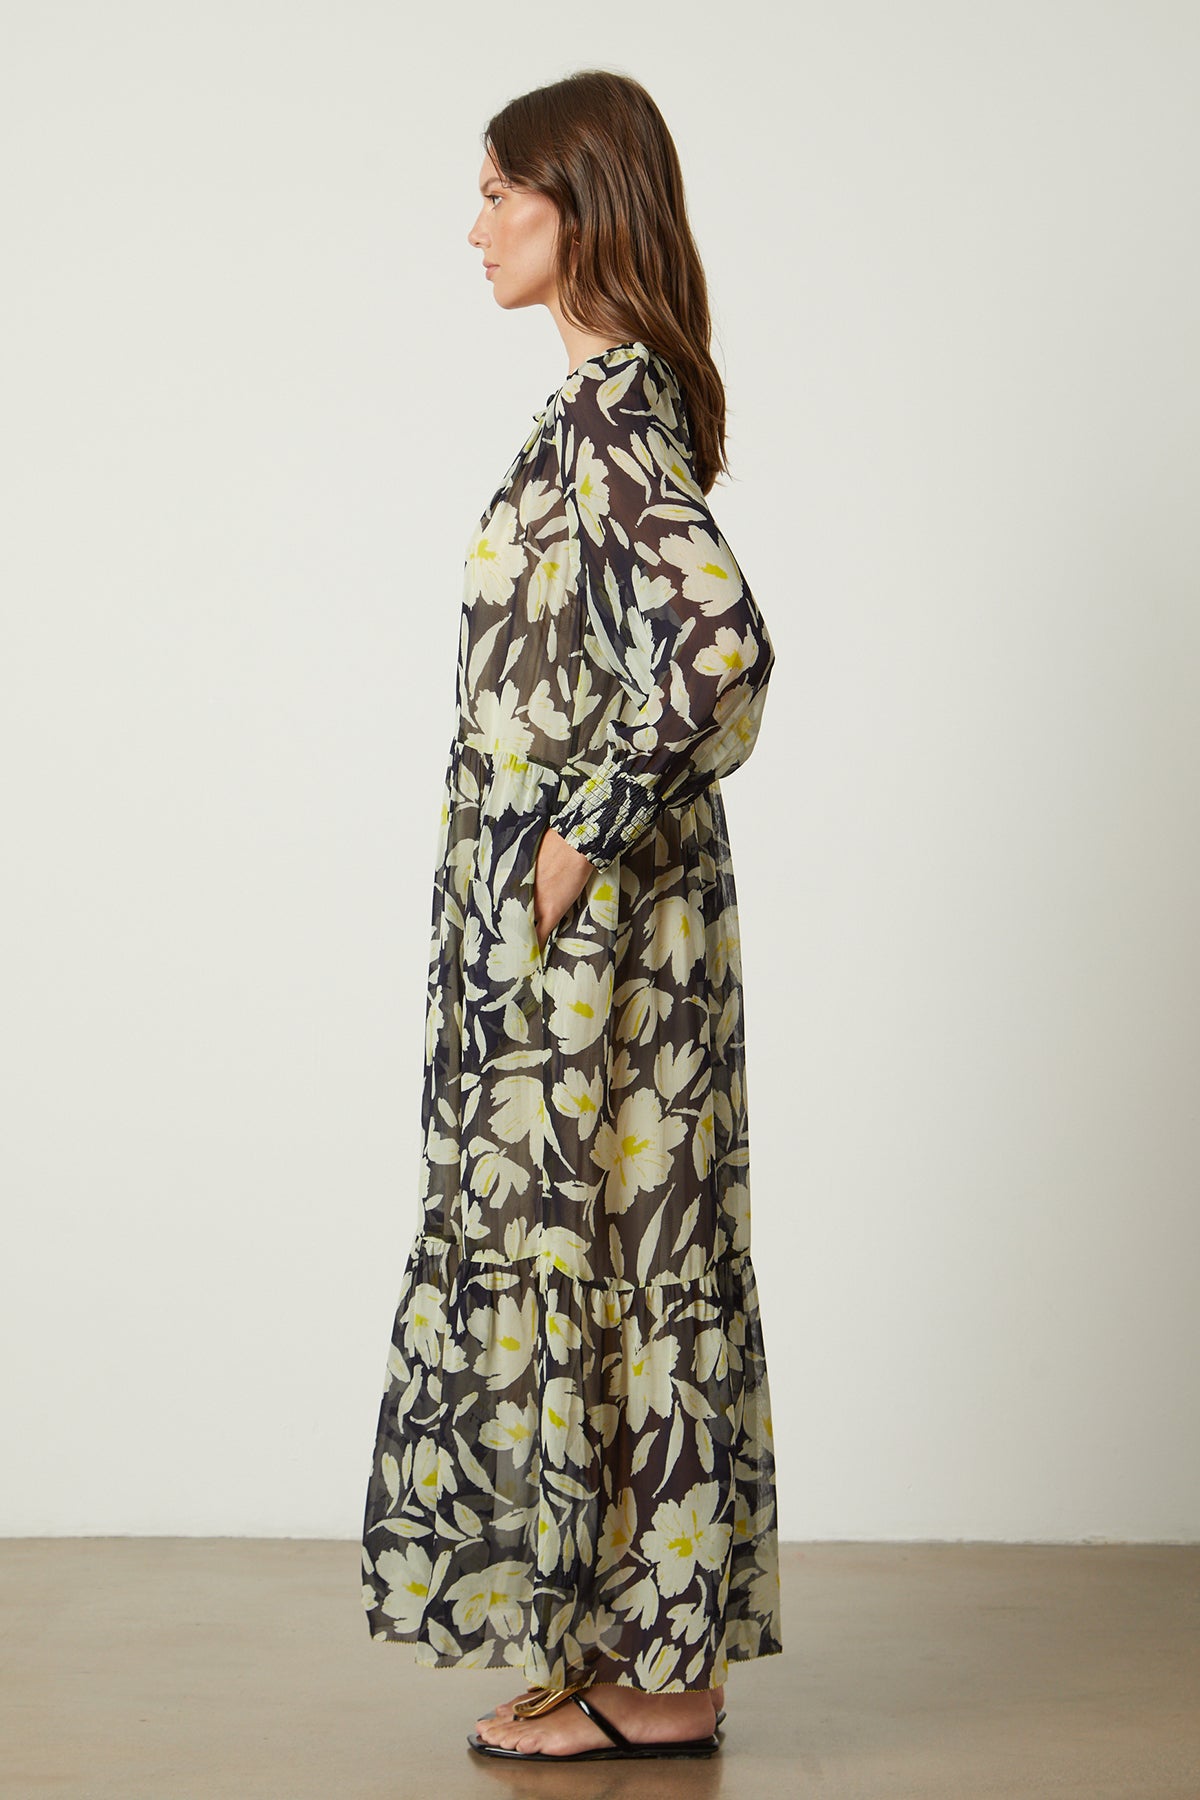 The back view of a woman wearing the Velvet by Graham & Spencer Serena Printed Maxi Dress.-26317295059137